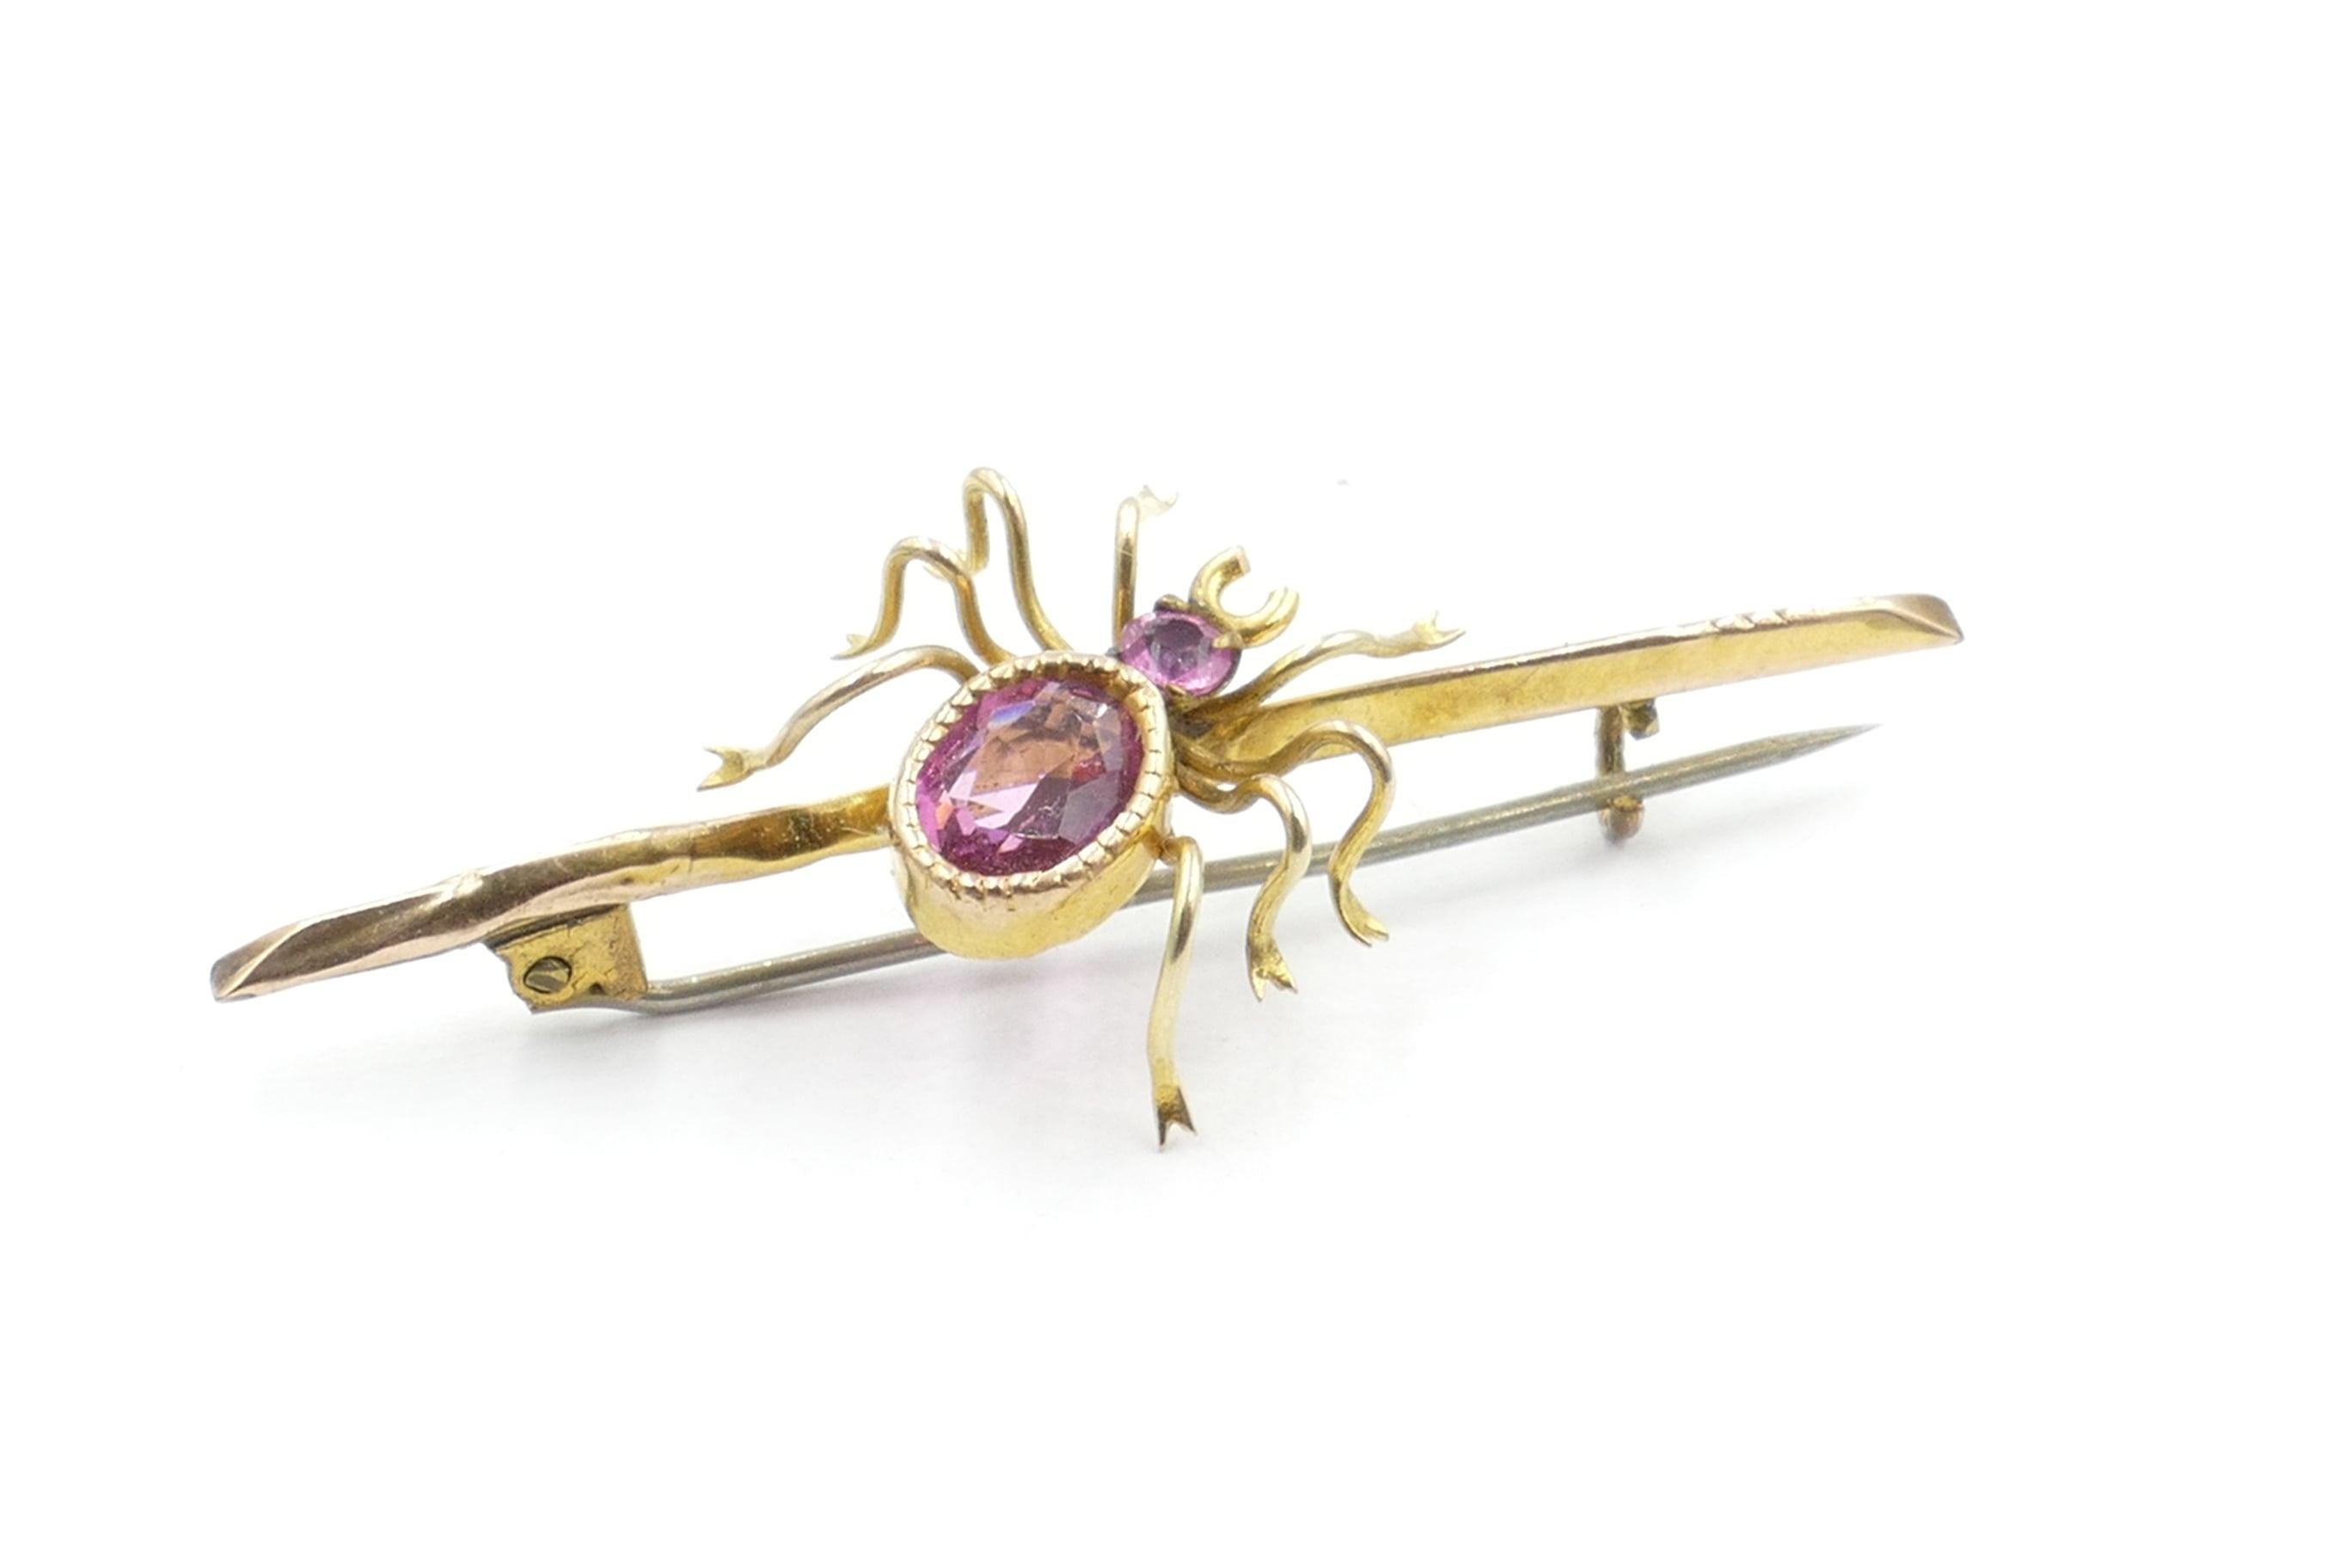 This gorgeous hand made 9ct Yellow Gold Spider Brooch is a real eye catcher.
It features an Oval Cut deep wine coloured reddish-purplish-pink Tourmaline, Millegrain - Bezel Set of approximately 0.7carats
 (6.9 X 5.2X 3.0mm) along with one round cut